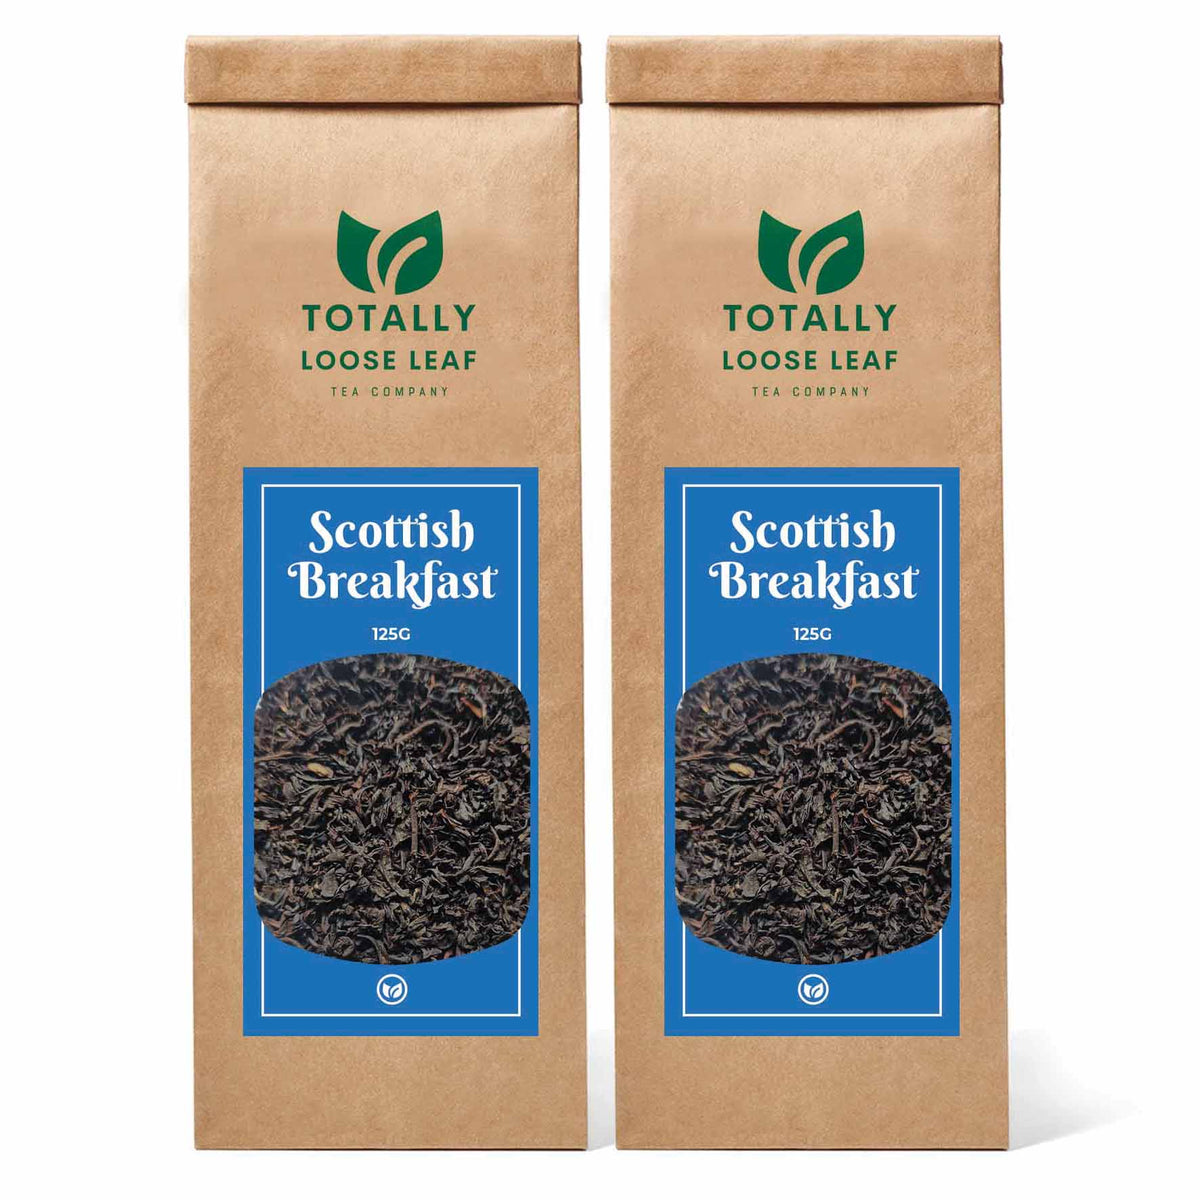 Scottish Breakfast Loose Leaf Tea - two pouches